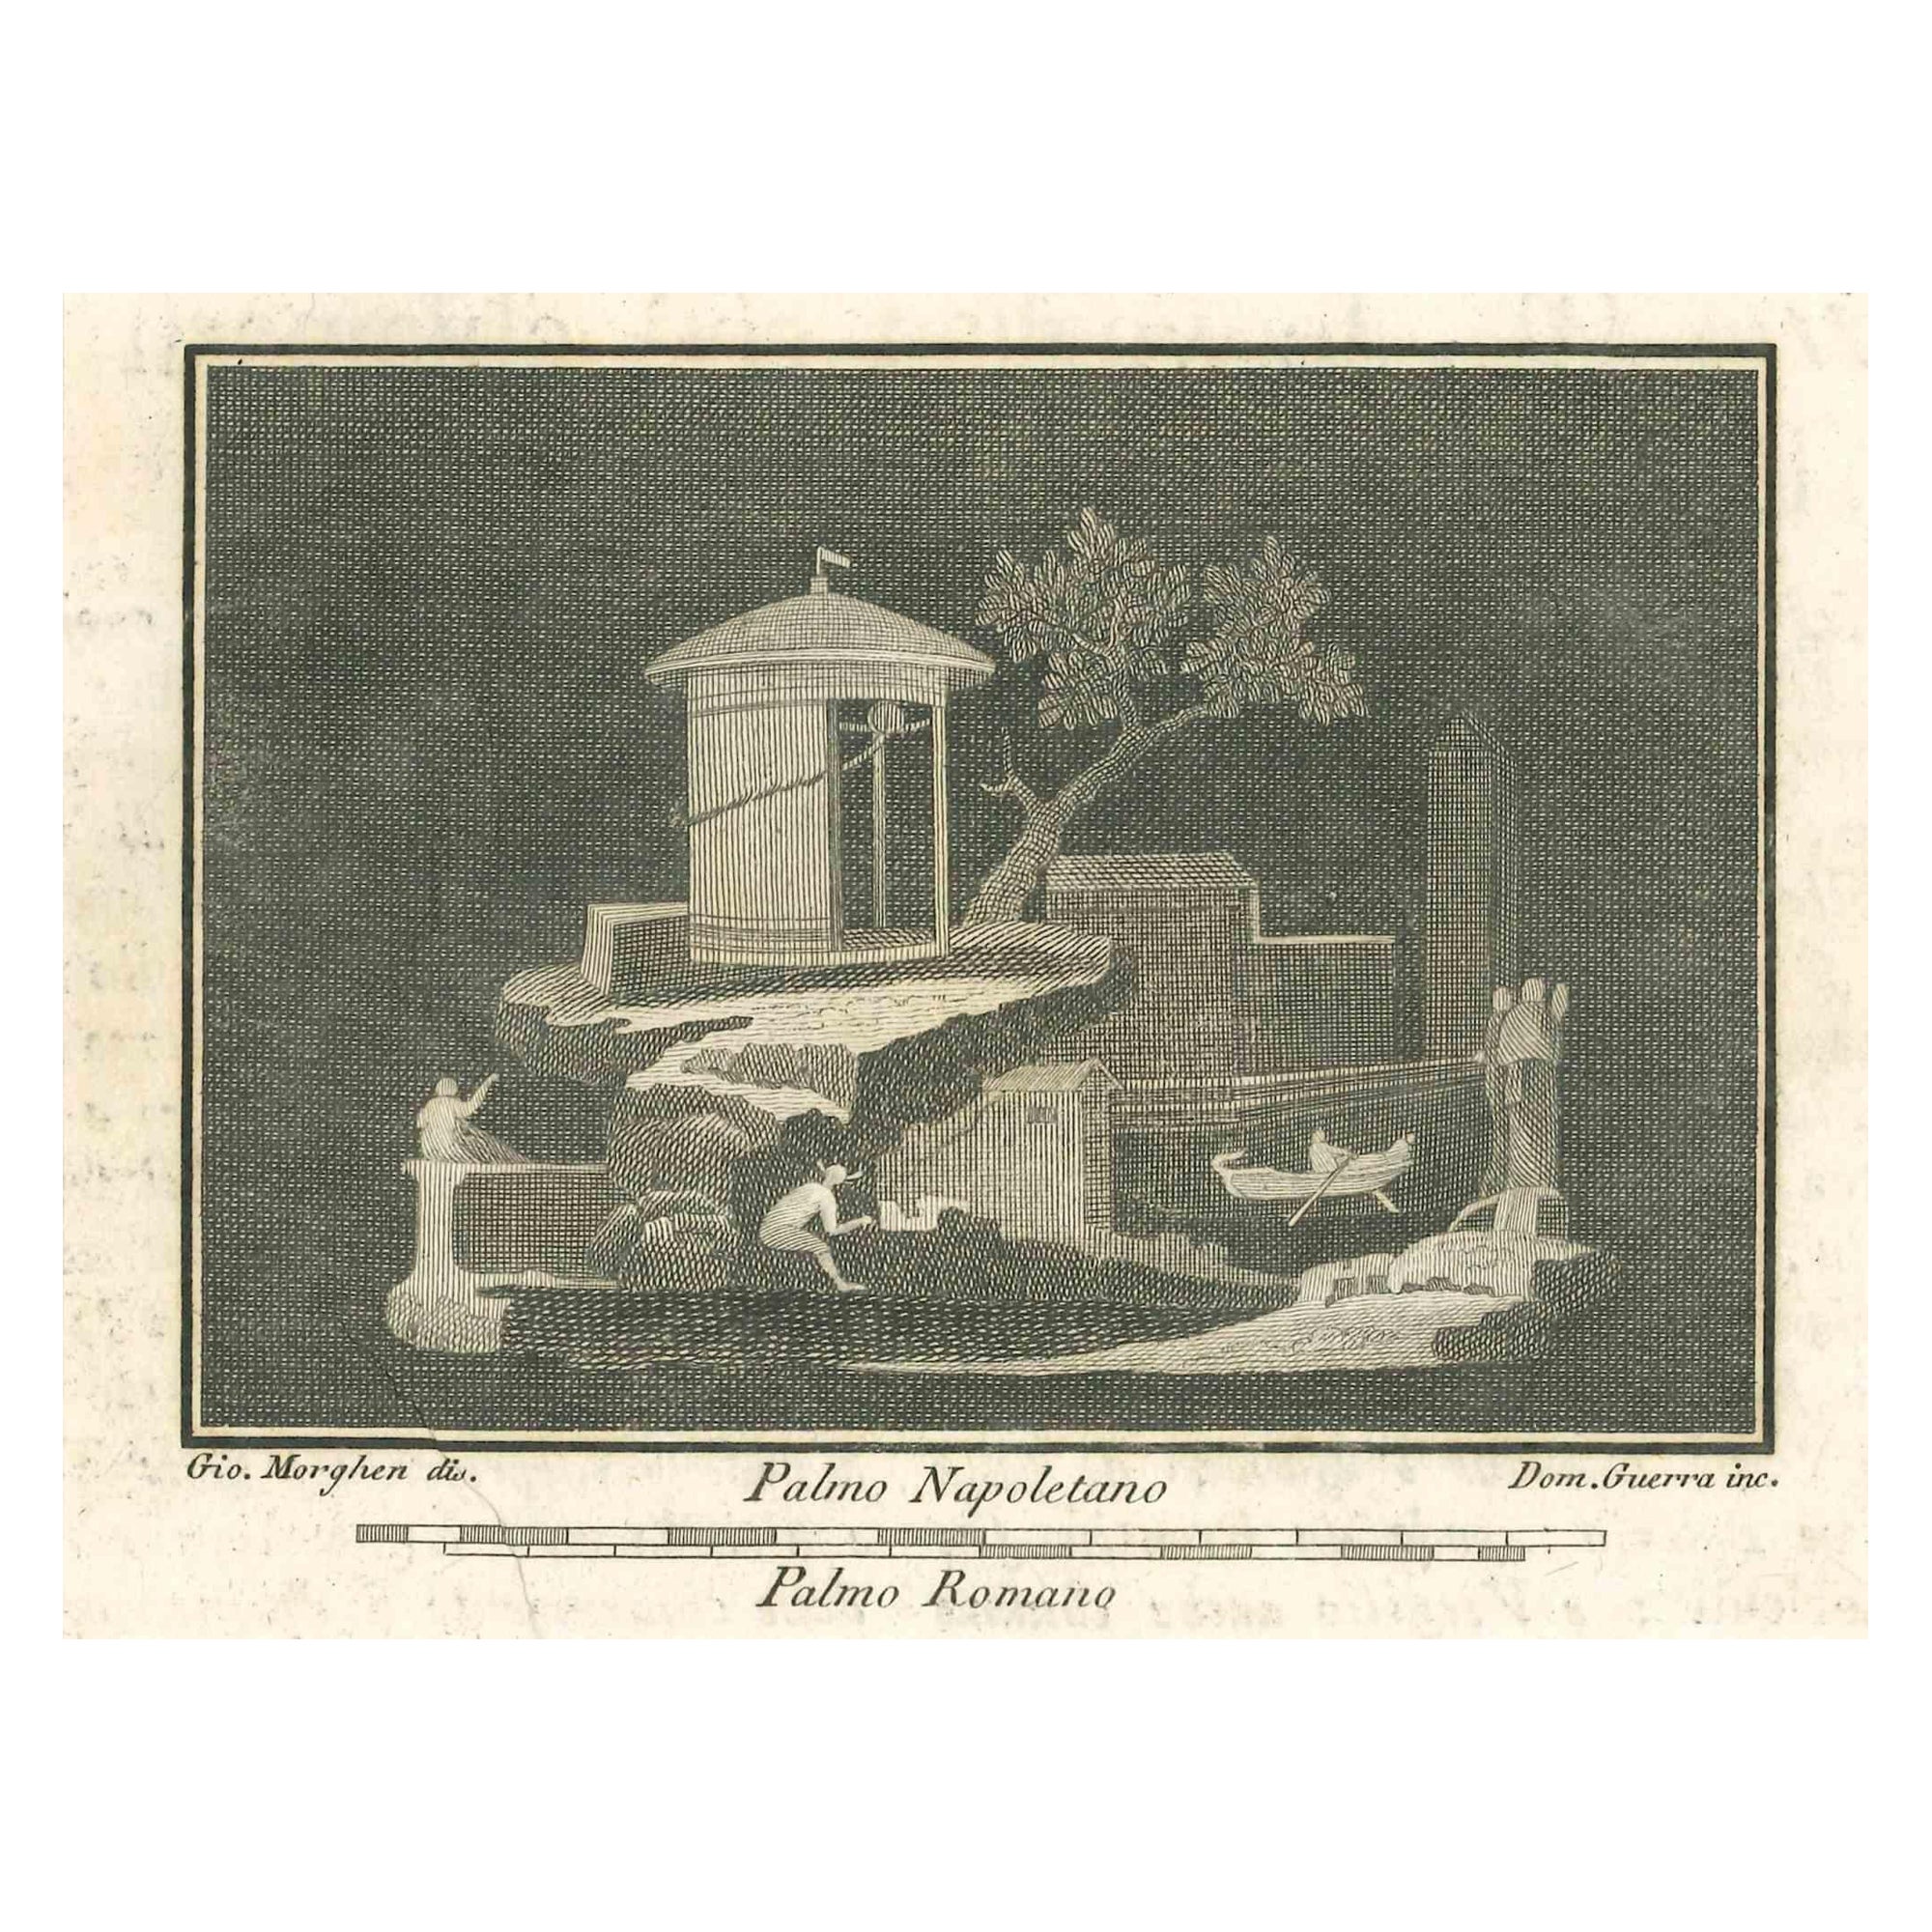 Ancient Roman Scene from the series "Antiquities of Herculaneum", is an original etching on paper realized by Giovanni Morghen in the 18th Century.

Signed on the plate.

Good conditions with some foxing.

The etching belongs to the print suite